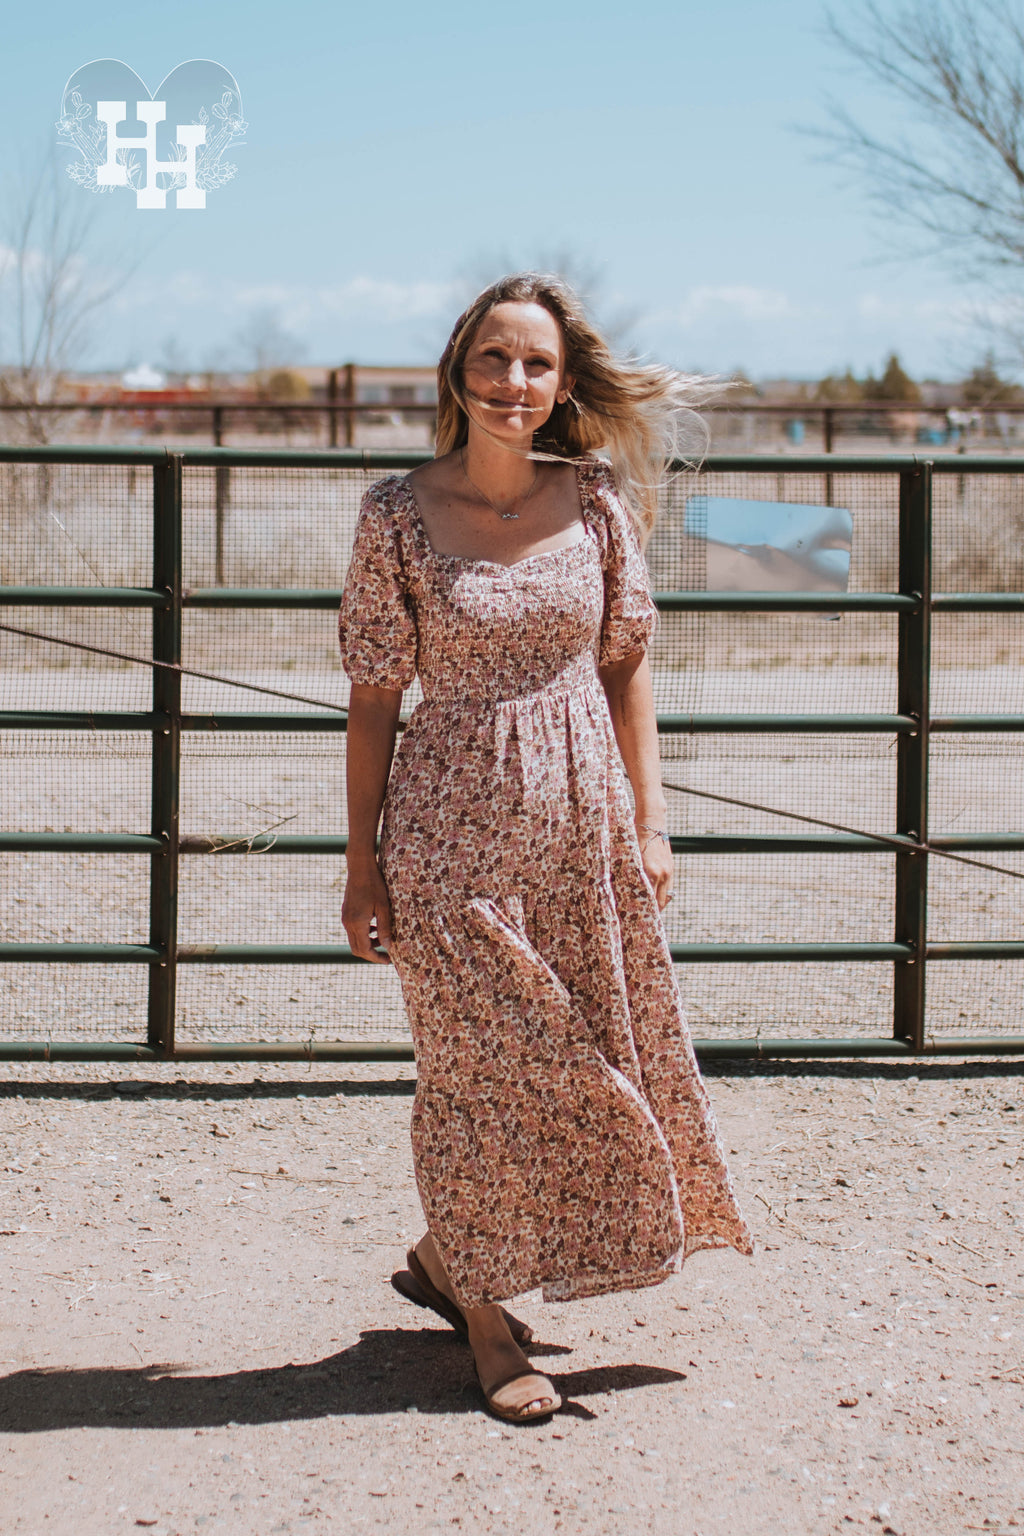 Girl standing in front of a metal gate on a windy day wearing a pink, brown, and cream colored floral maxi dress. Dress has puff short sleeves, smocked bodice with a sweetheart neckline. The bottom of the dress is tierd. 